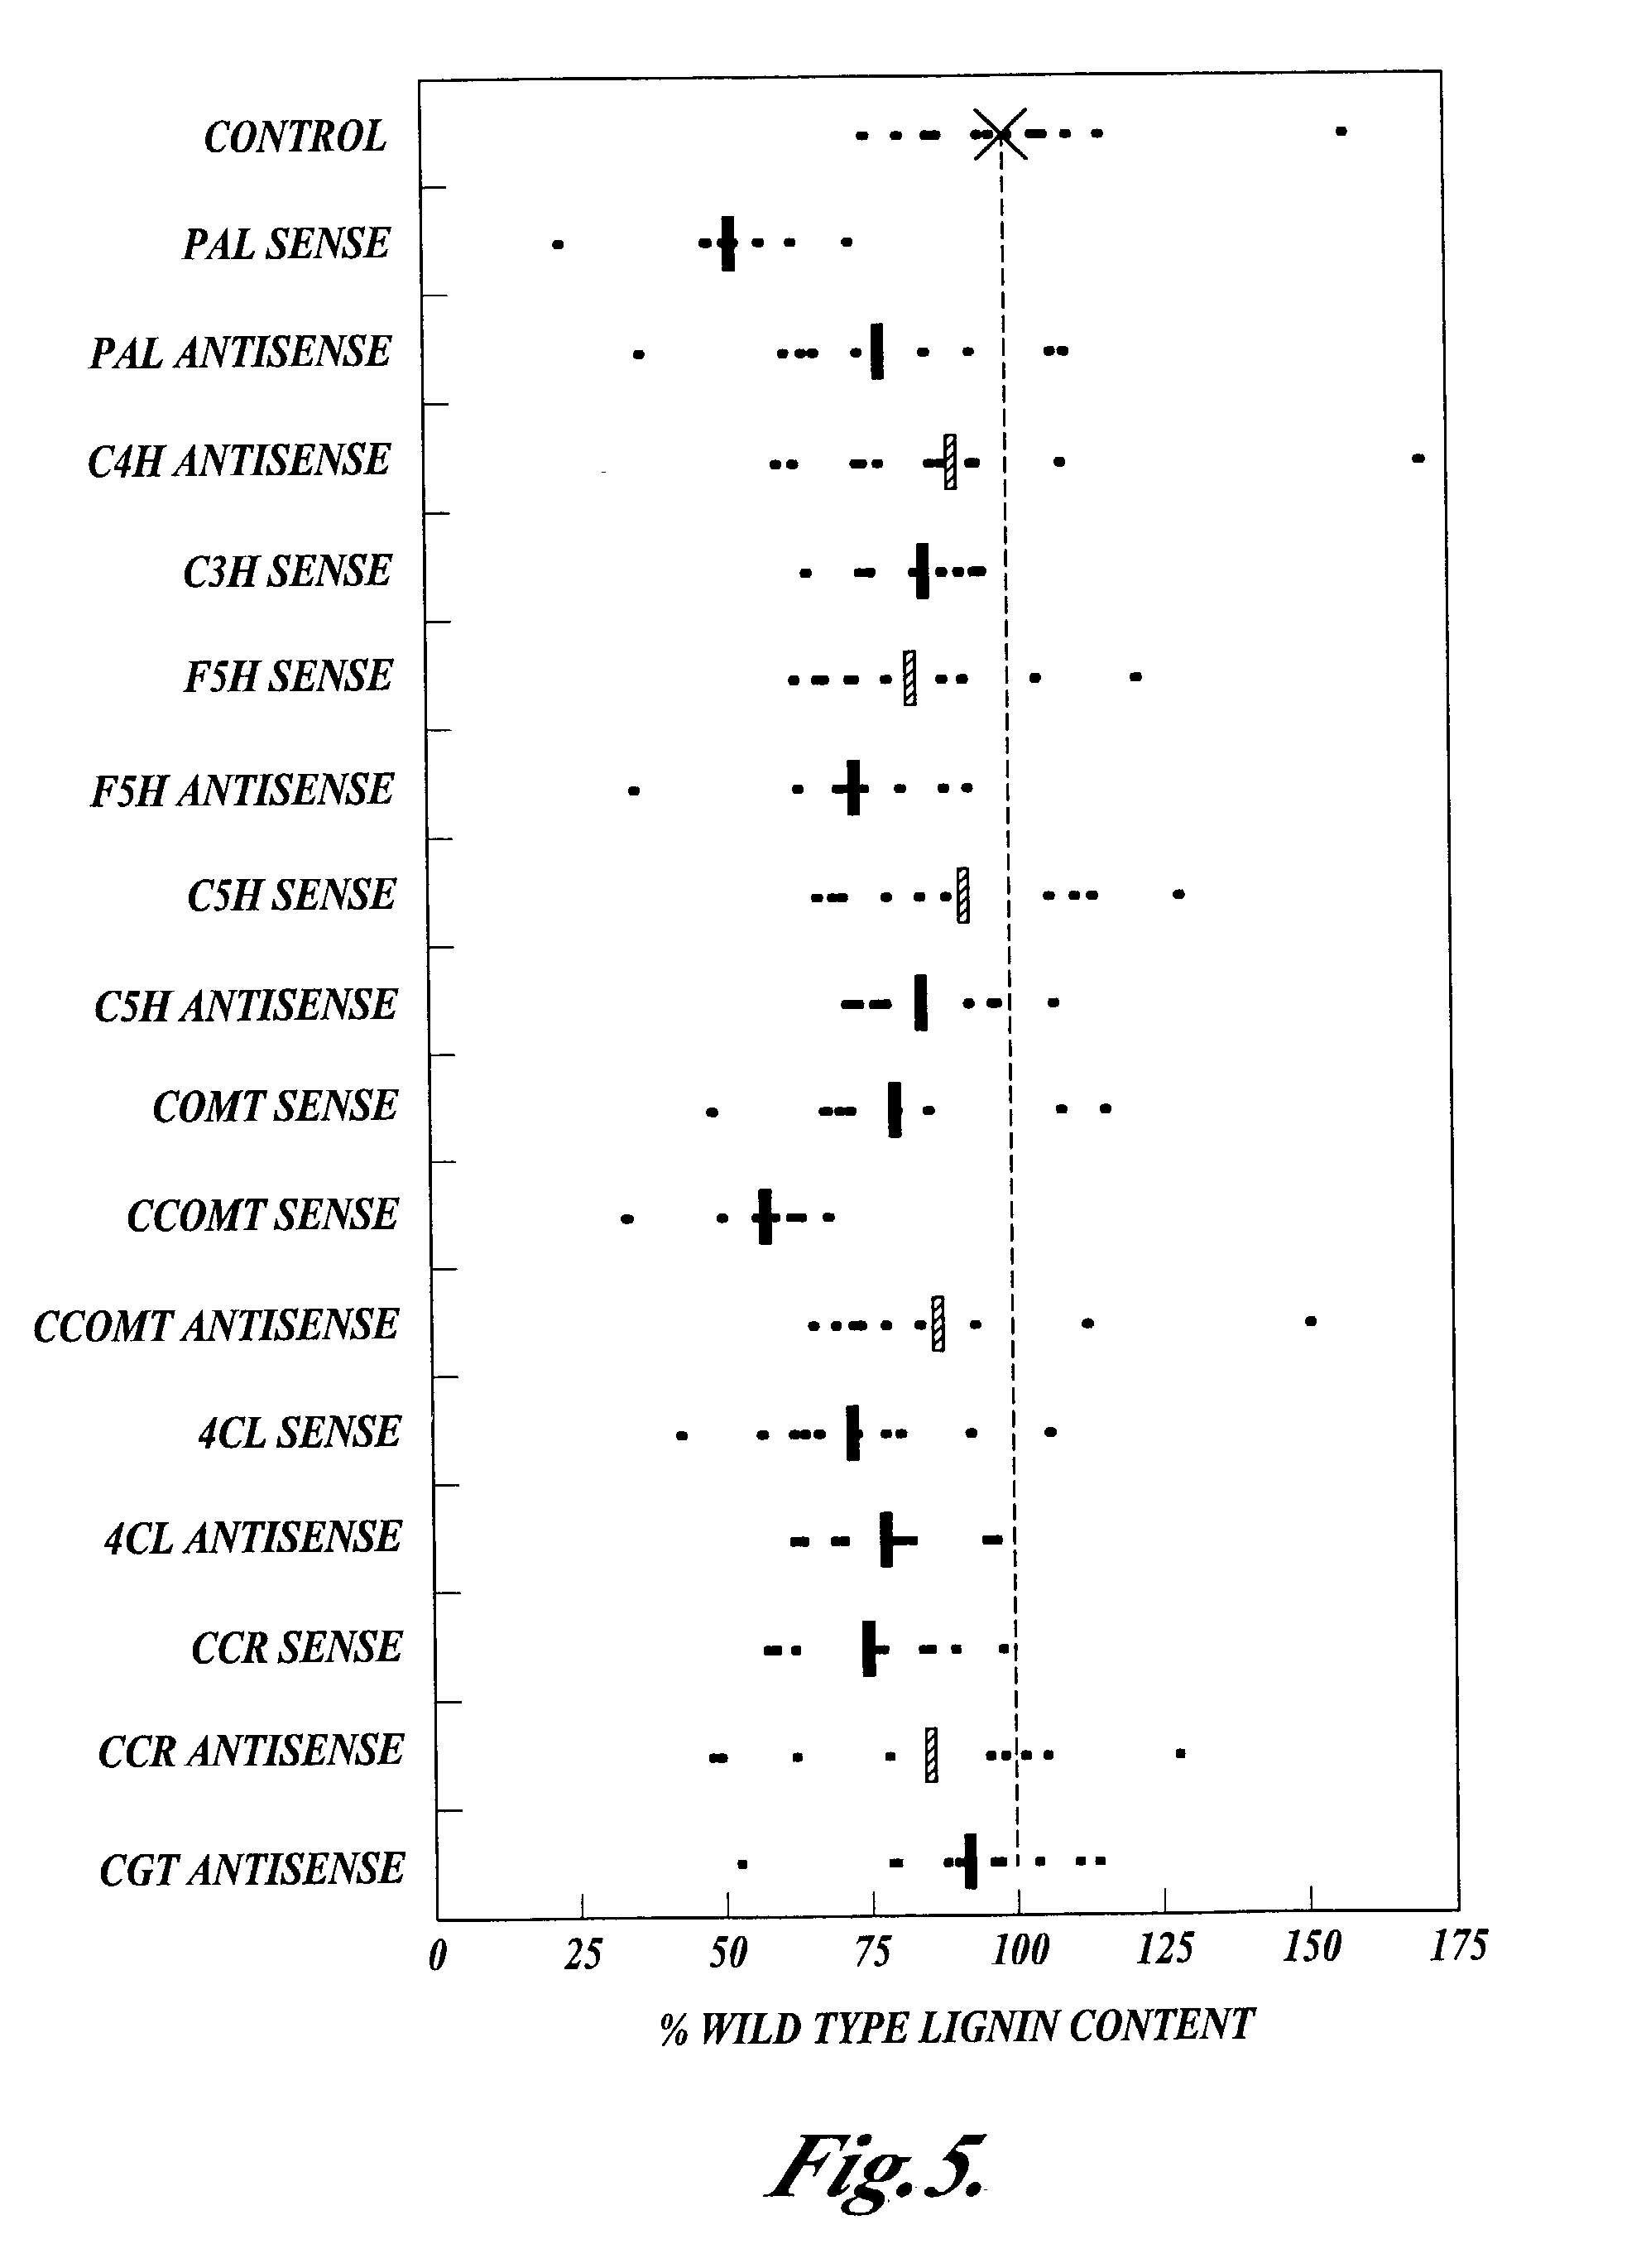 Materials and methods for the modification of plant lignin content